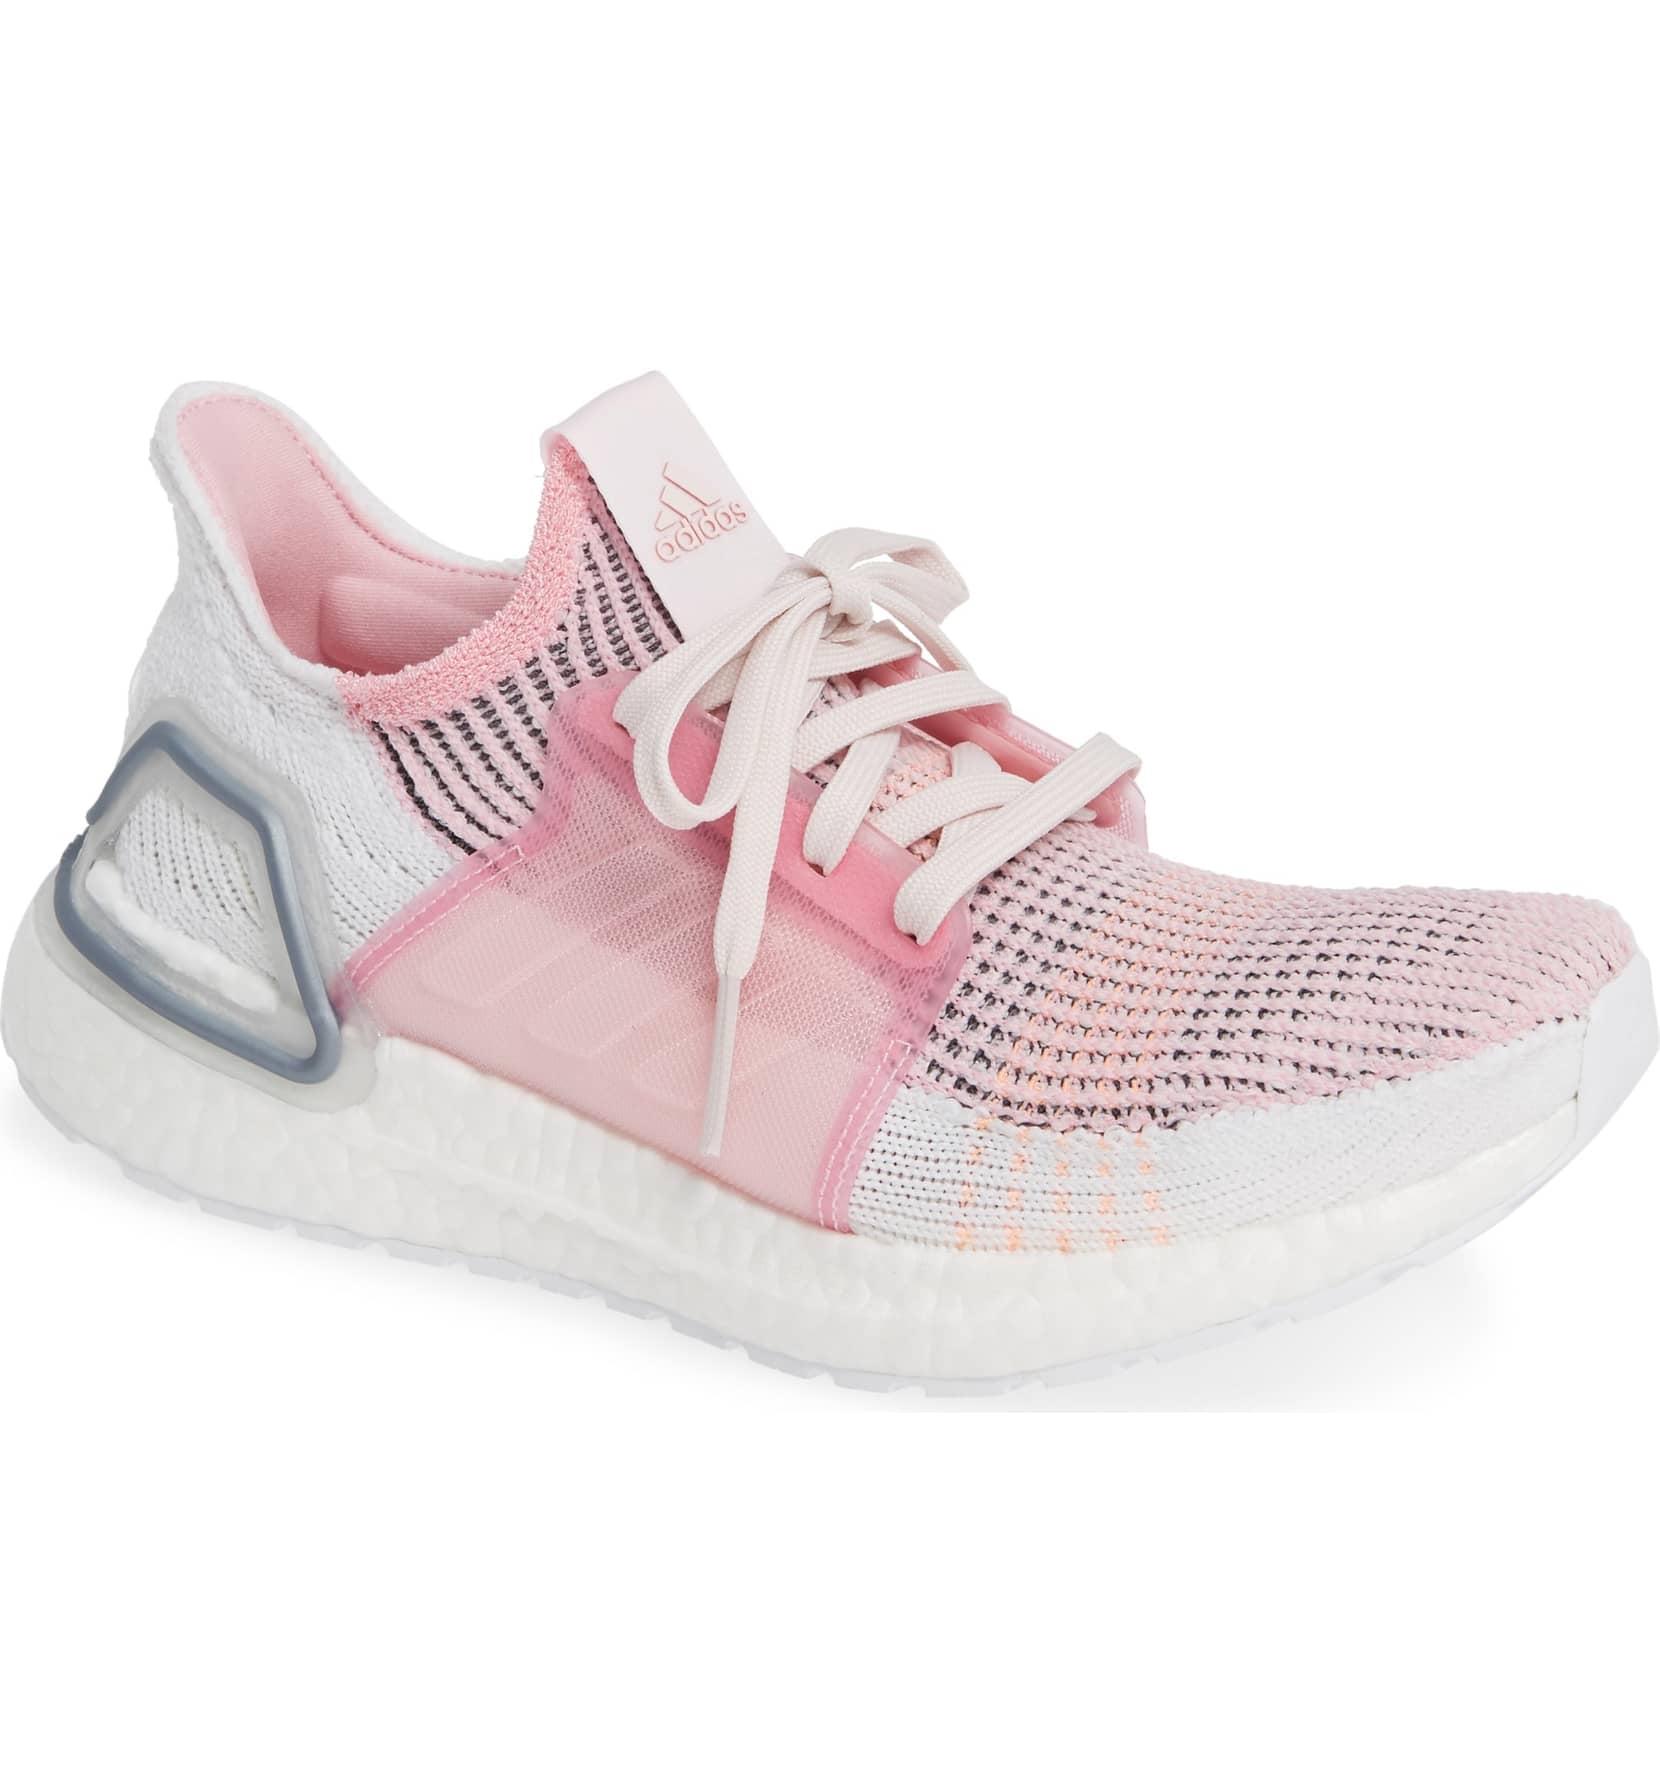 Watchful Perhaps image Adidas UltraBoost 19 Running Shoe | Feel Like You're Running on Clouds With  These Supportive Shoes From Nordstrom | POPSUGAR Fitness Photo 6